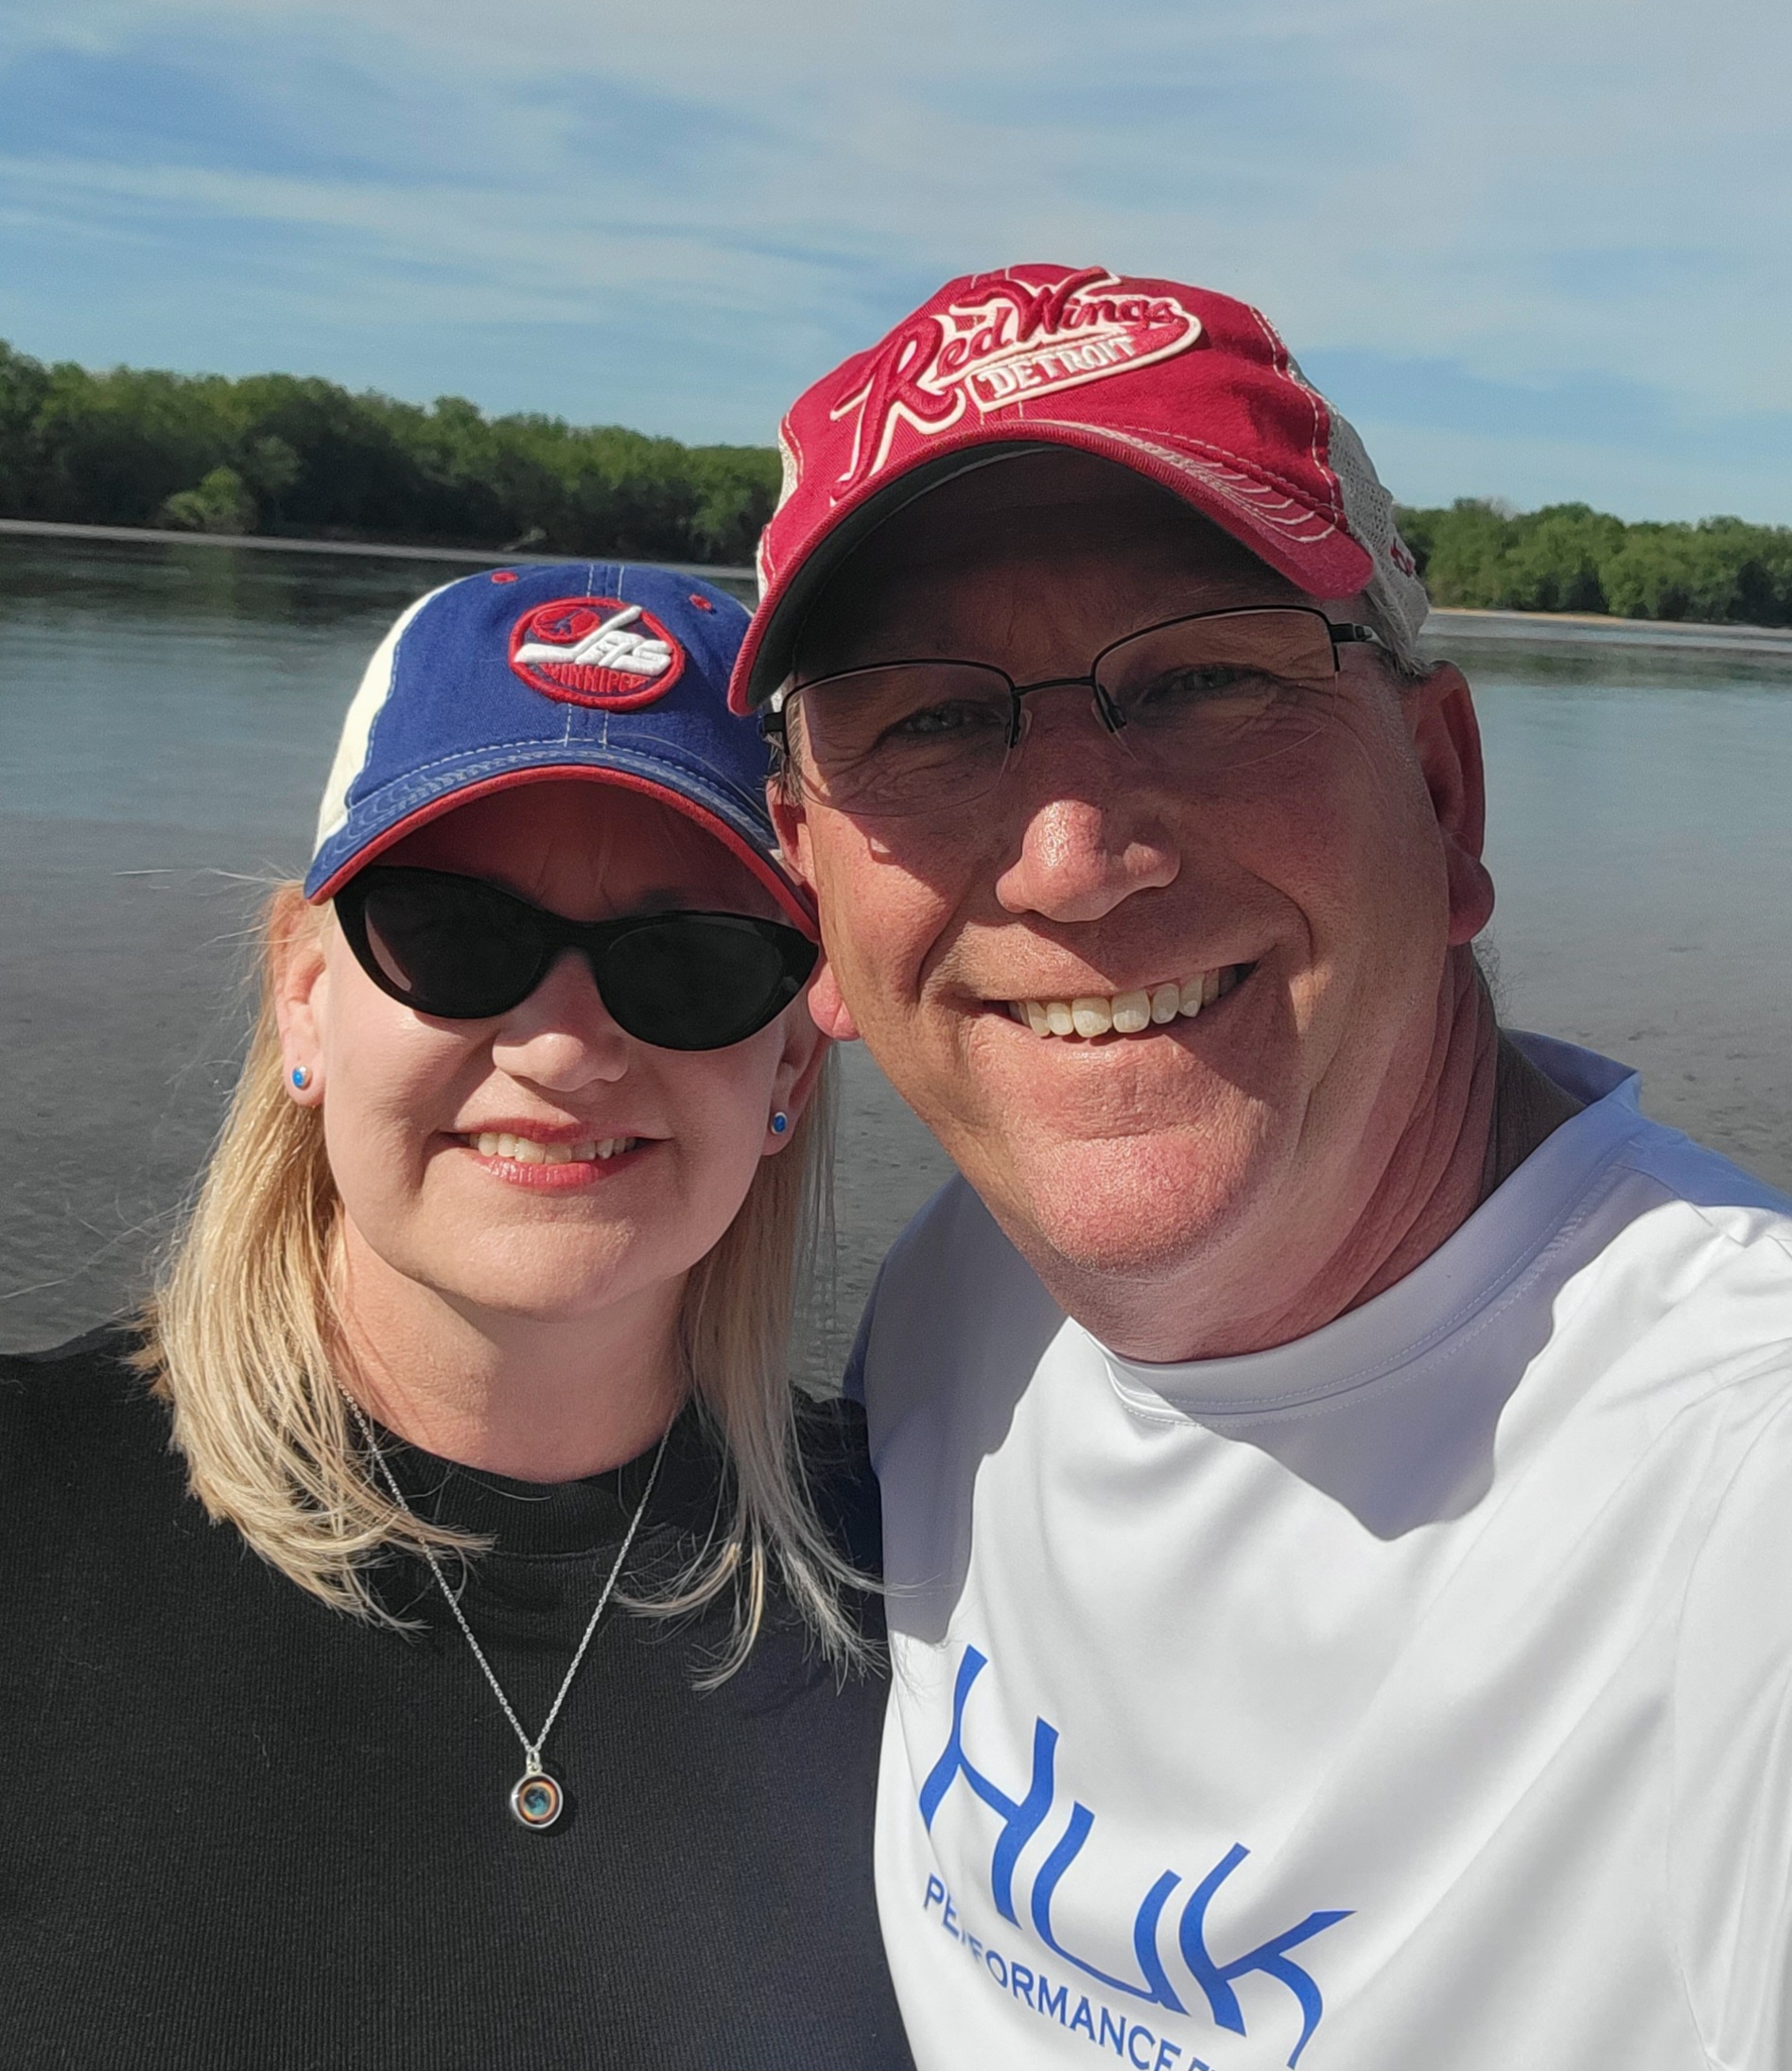 Bradd and Cathie smile. They wear baseball caps and stand in front of a lake.